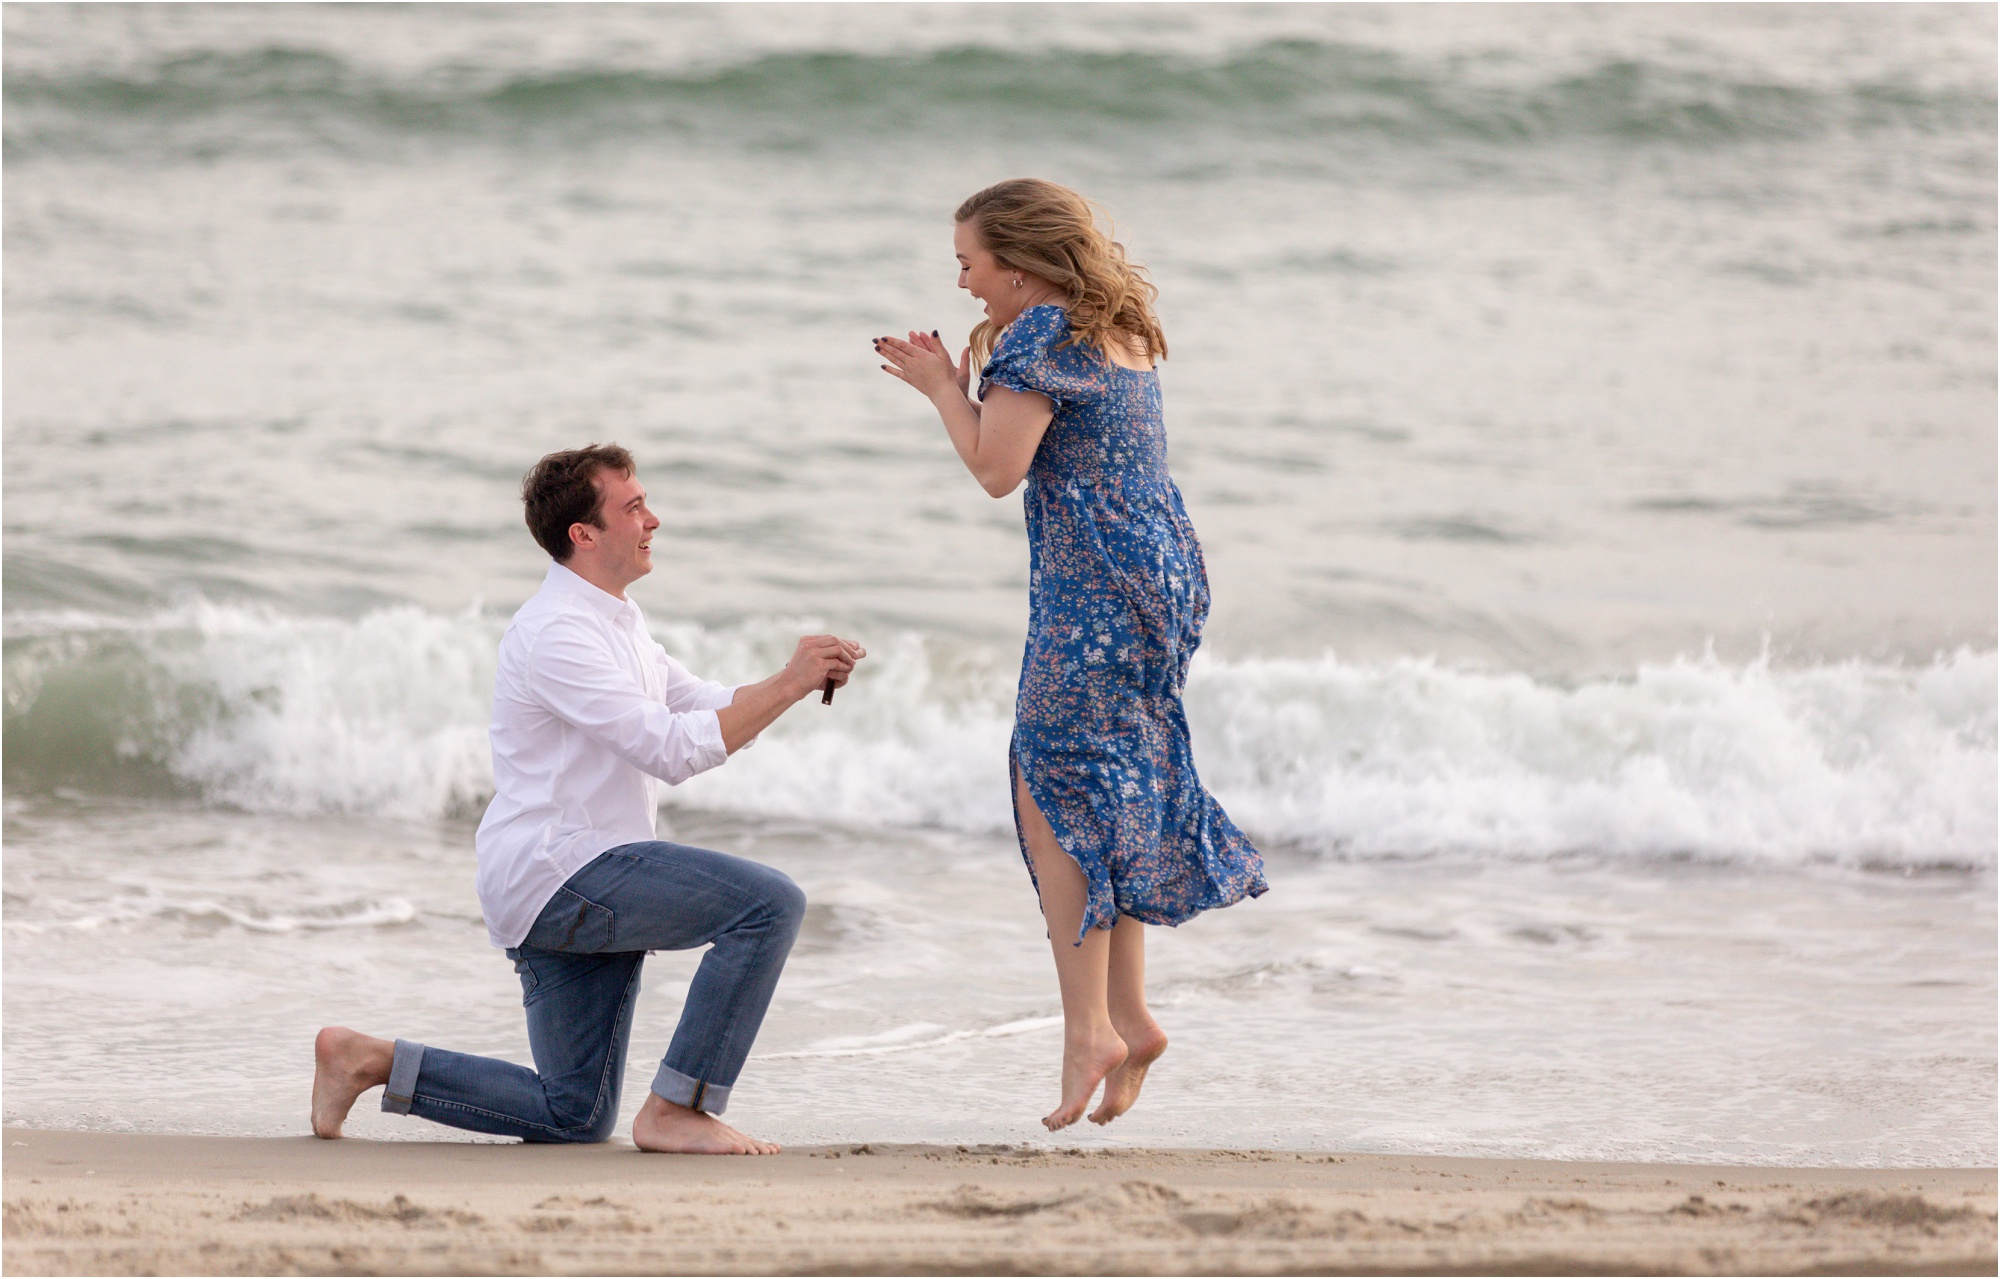 Surprise proposal at beach in Emerald Isle